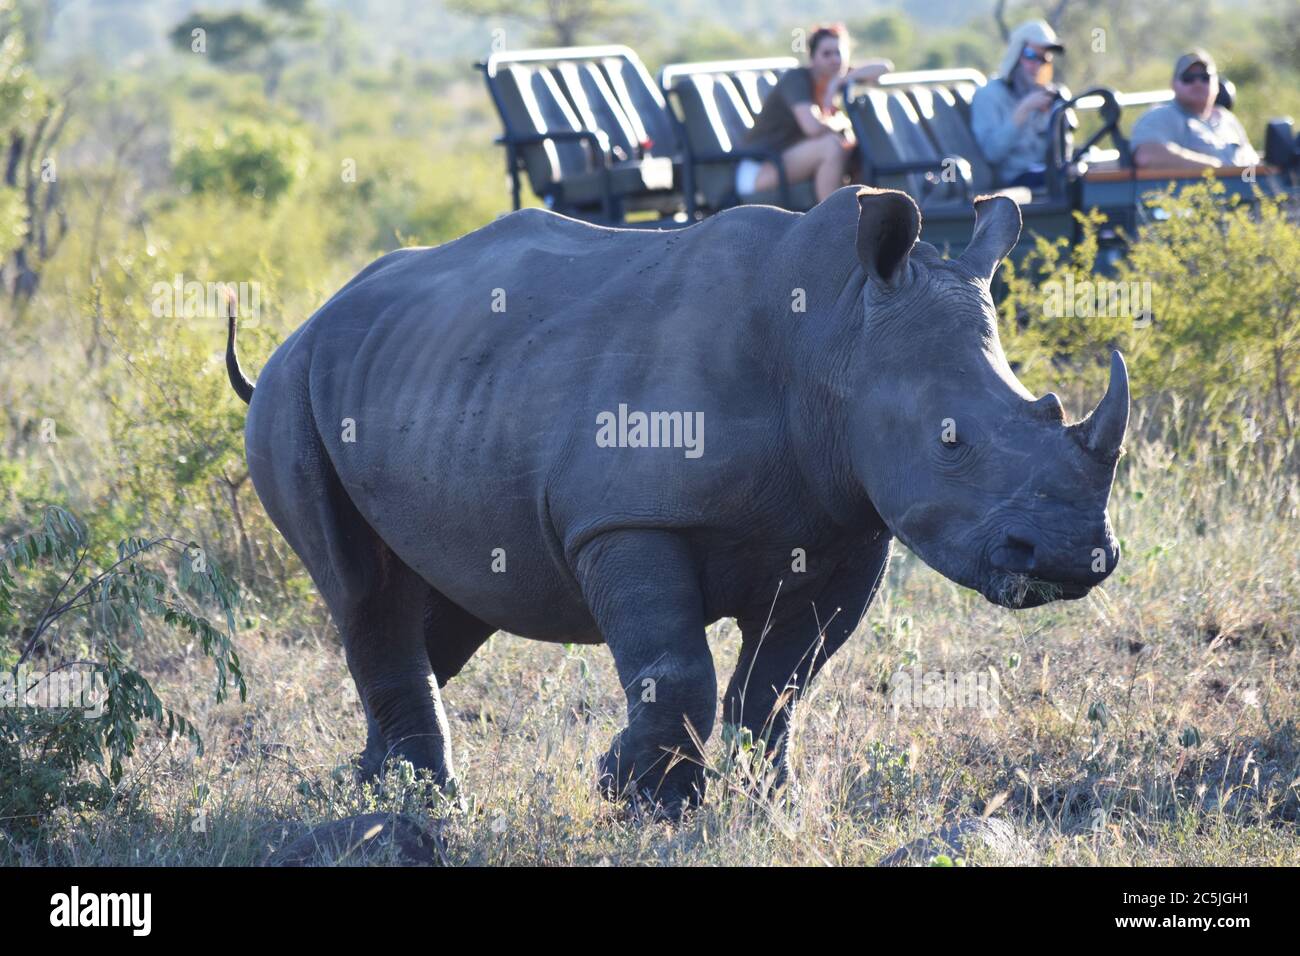 A Rhinoceros (Rhinocerotoidea) in the African savannah being viewed by people in a safari vehicle in Sabi Sand Game Reserve, South Africa. Stock Photo